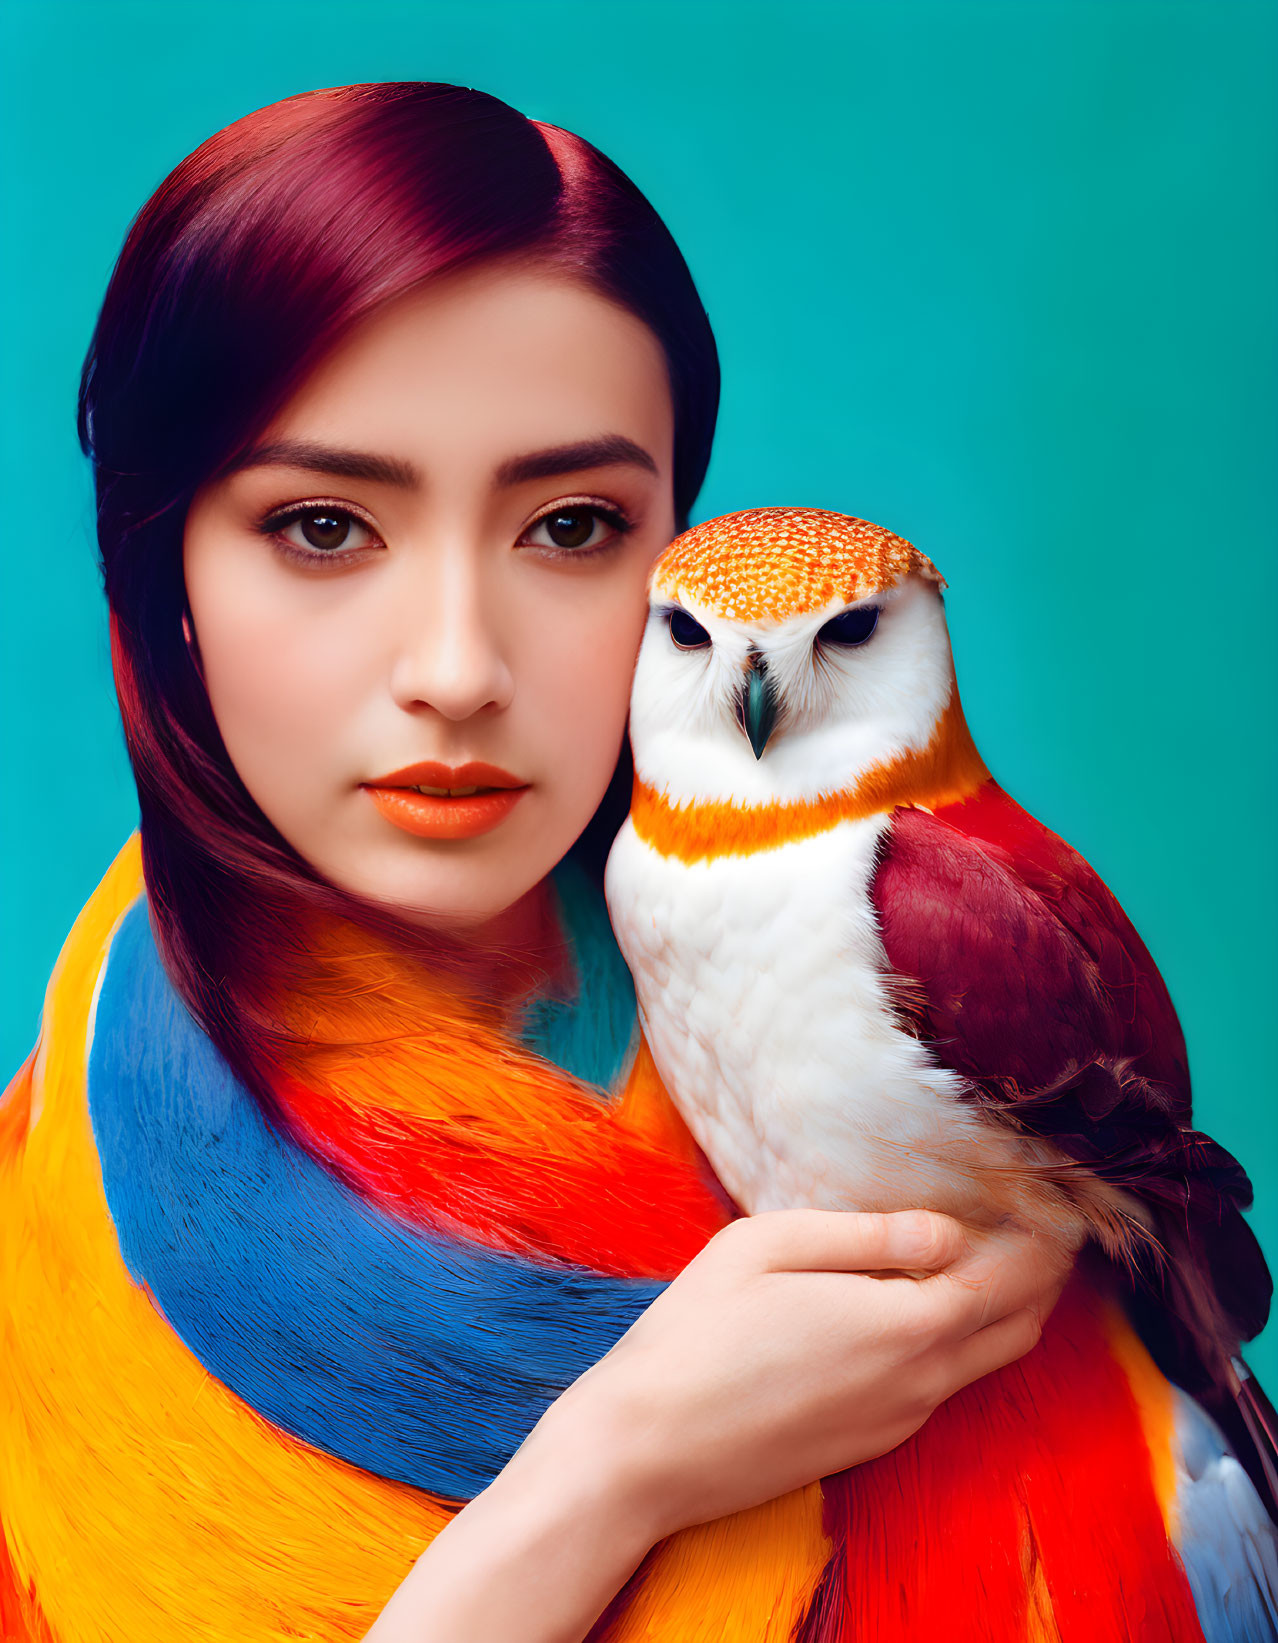 Colorful Woman Holding Vibrant Owl on Teal Background